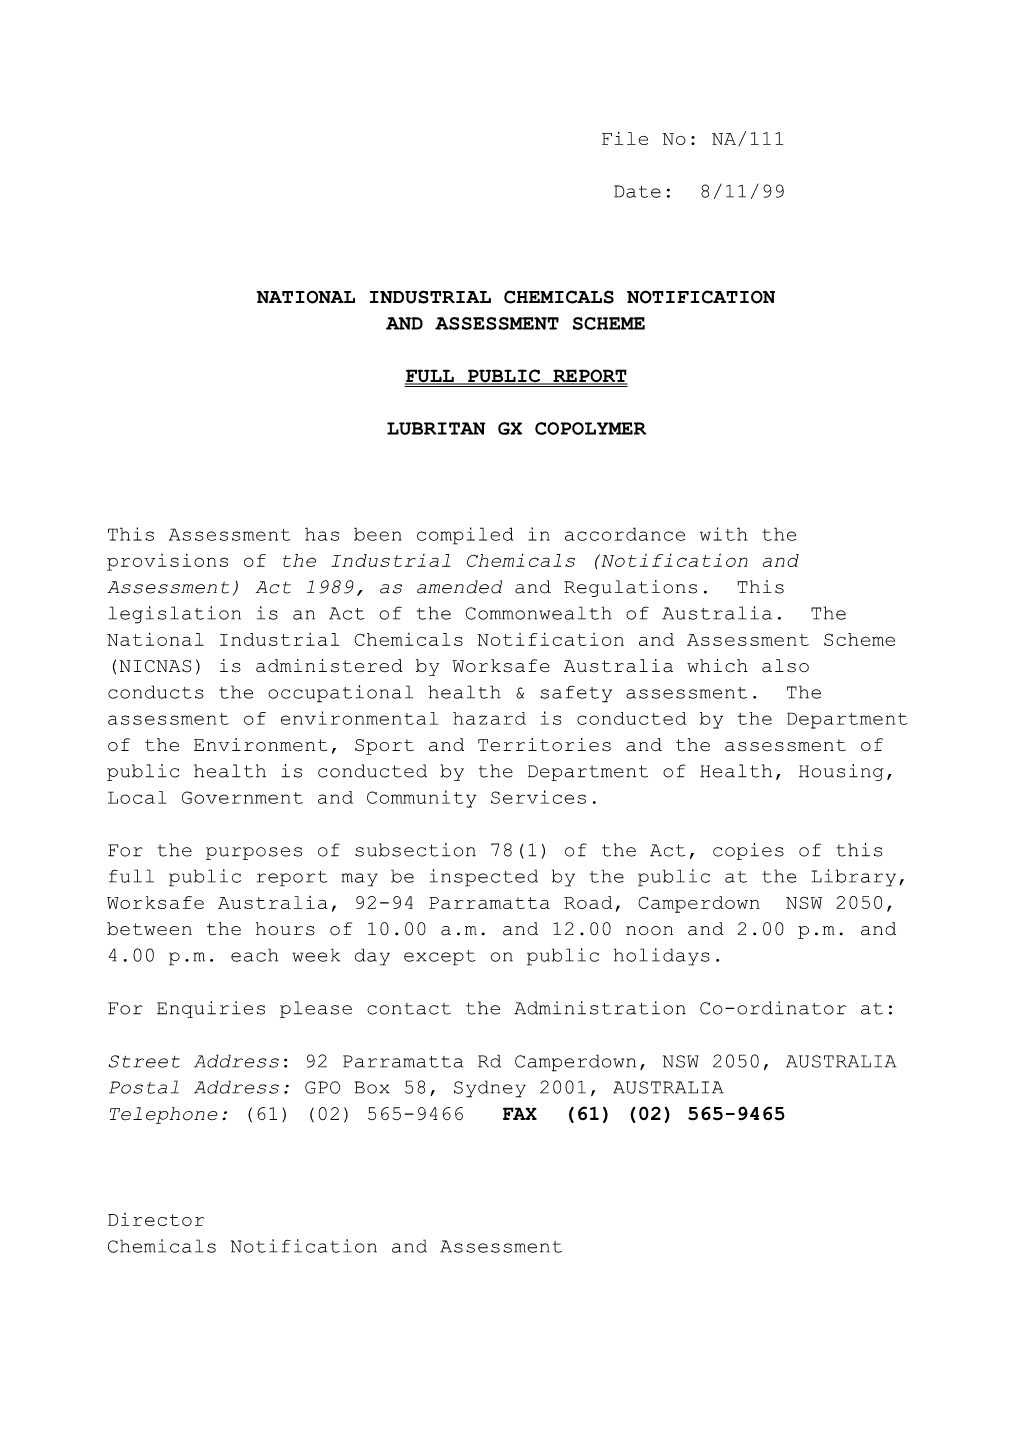 National Industrial Chemicals Notification and Assessment Scheme s49